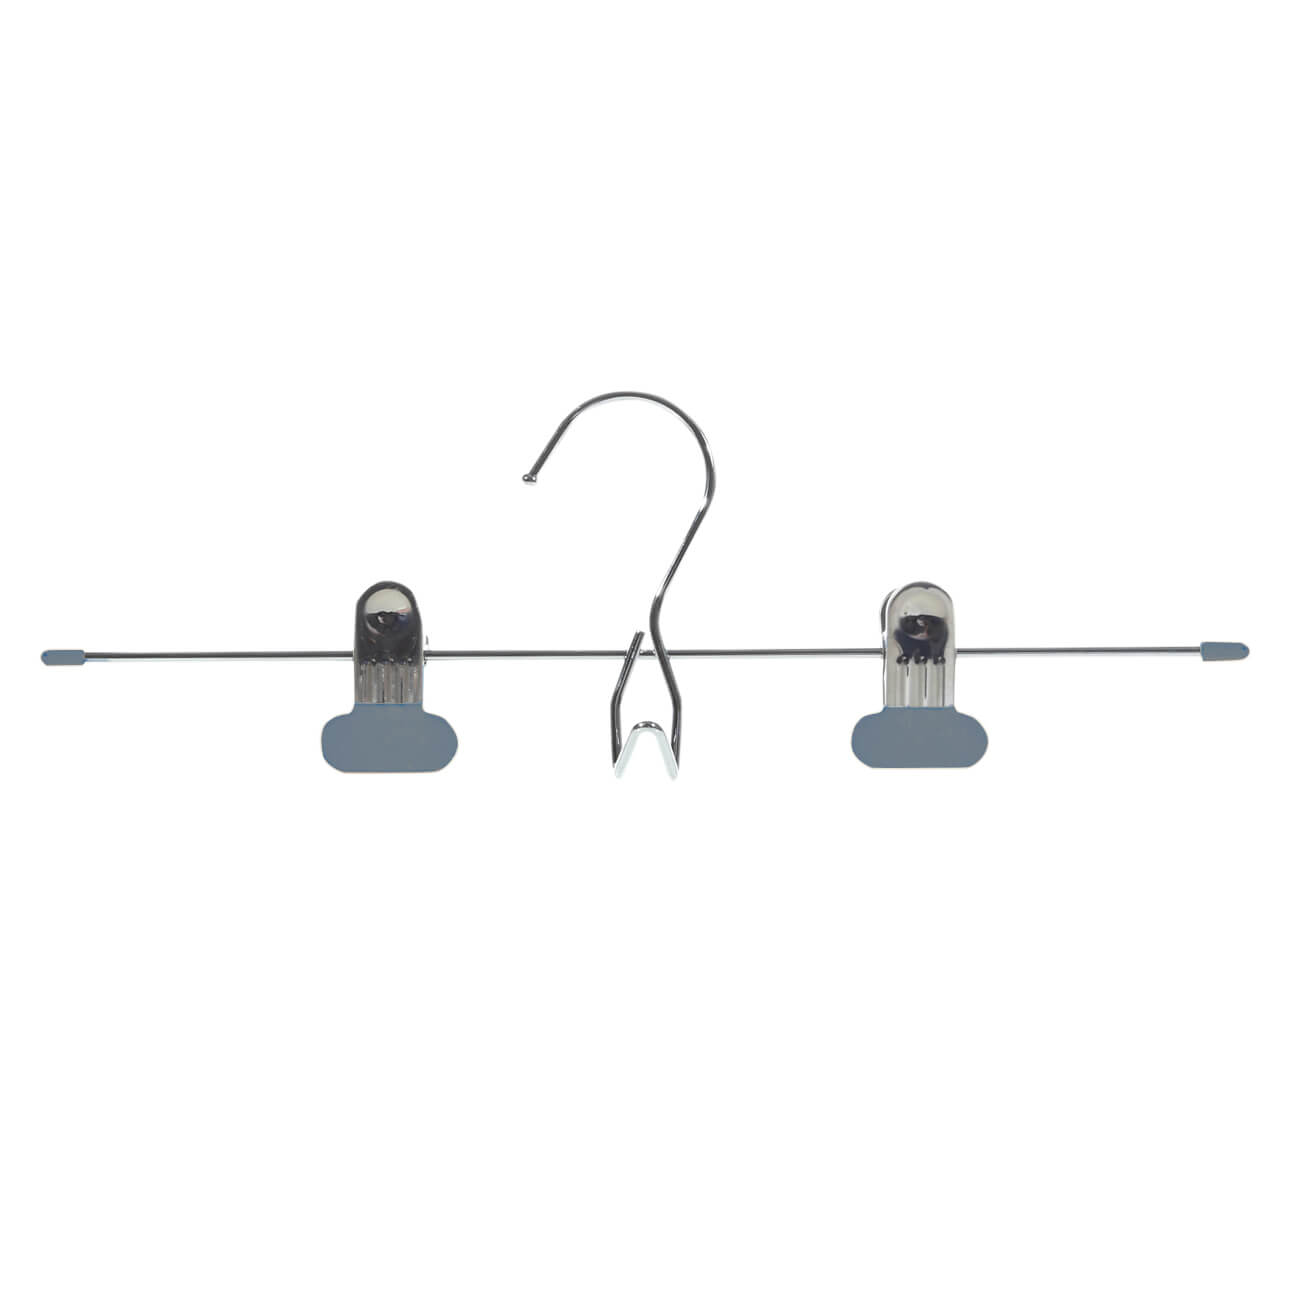 Pant/skirt hanger, 33 cm, 3 pcs, with clips, Coated metal, Grey, Colorful house изображение № 1